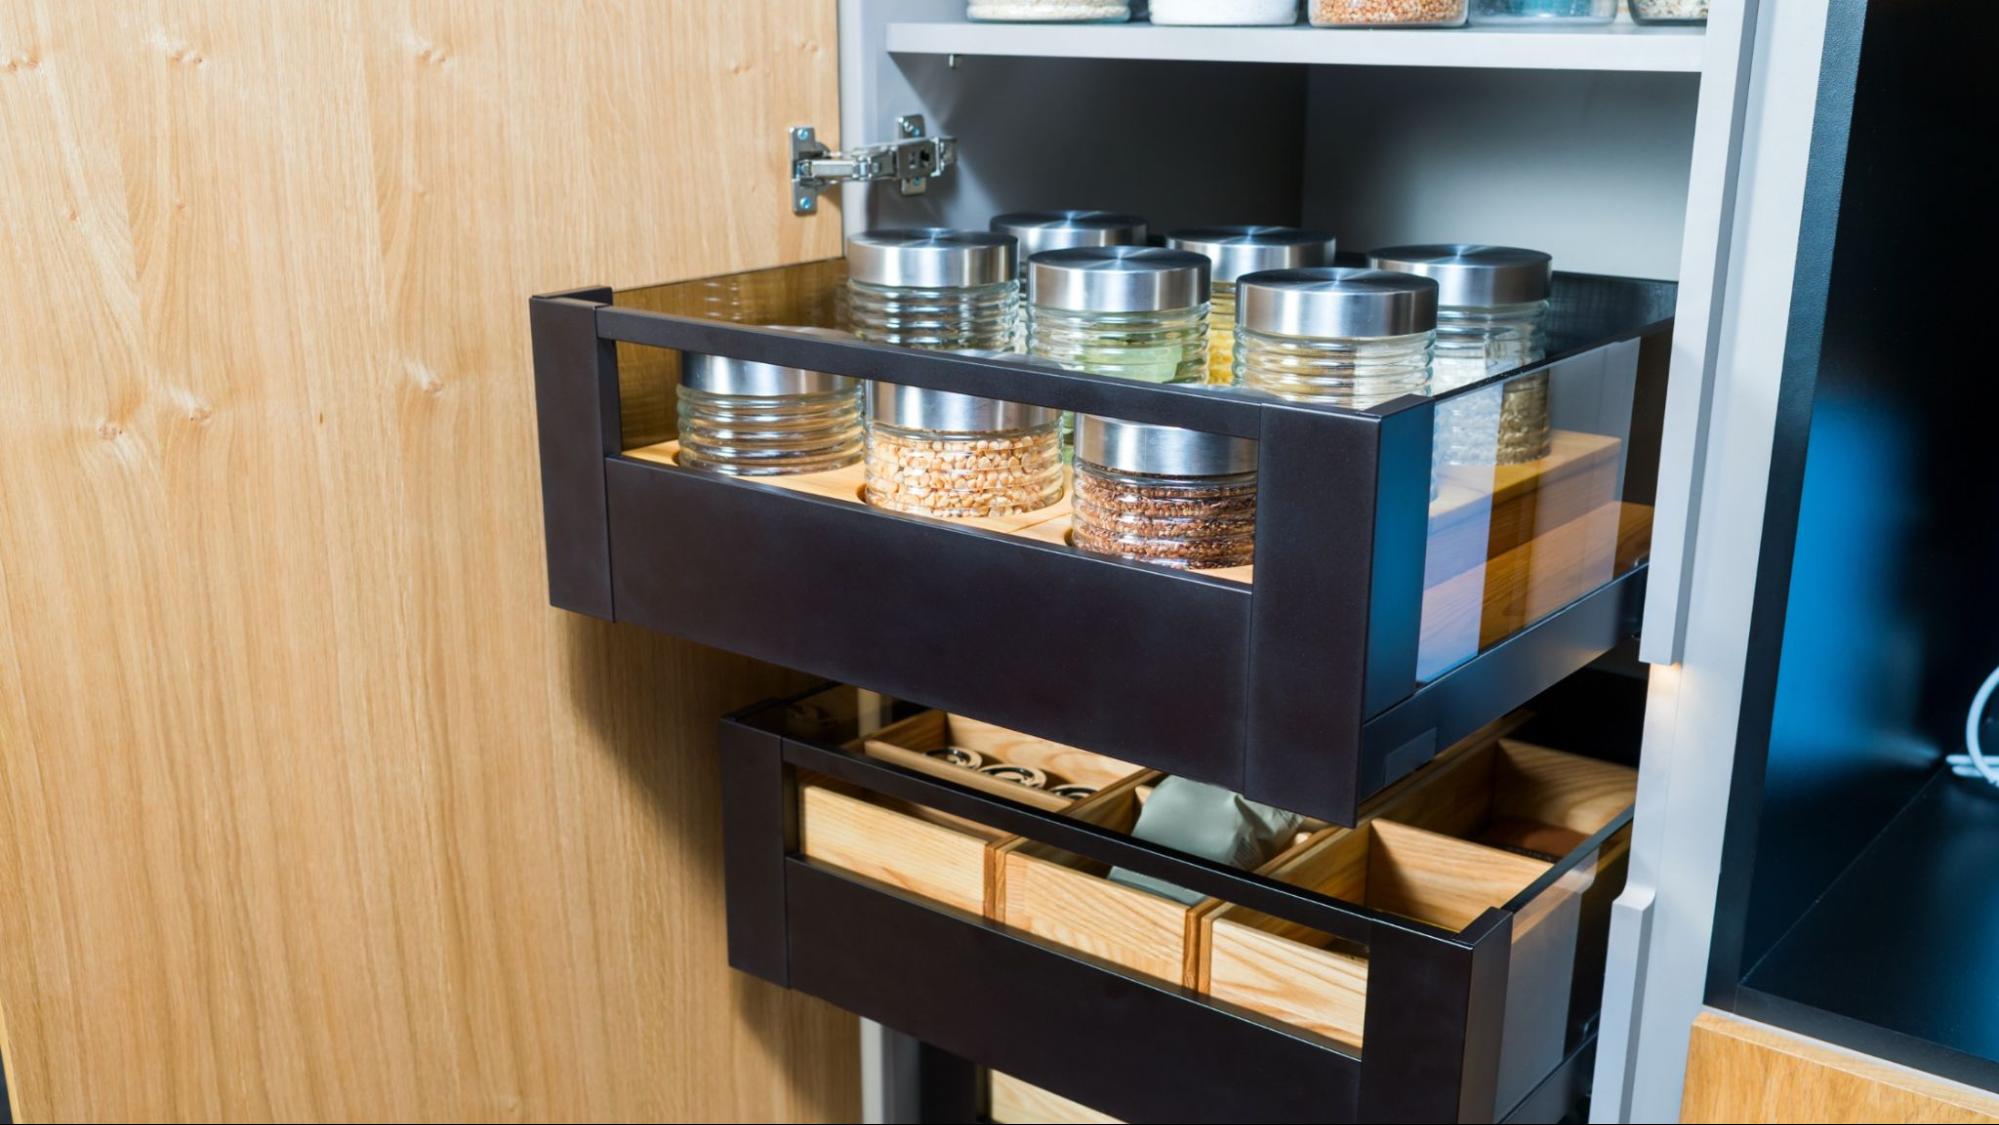 Food Storage in Small Spaces - Whole Natural Life